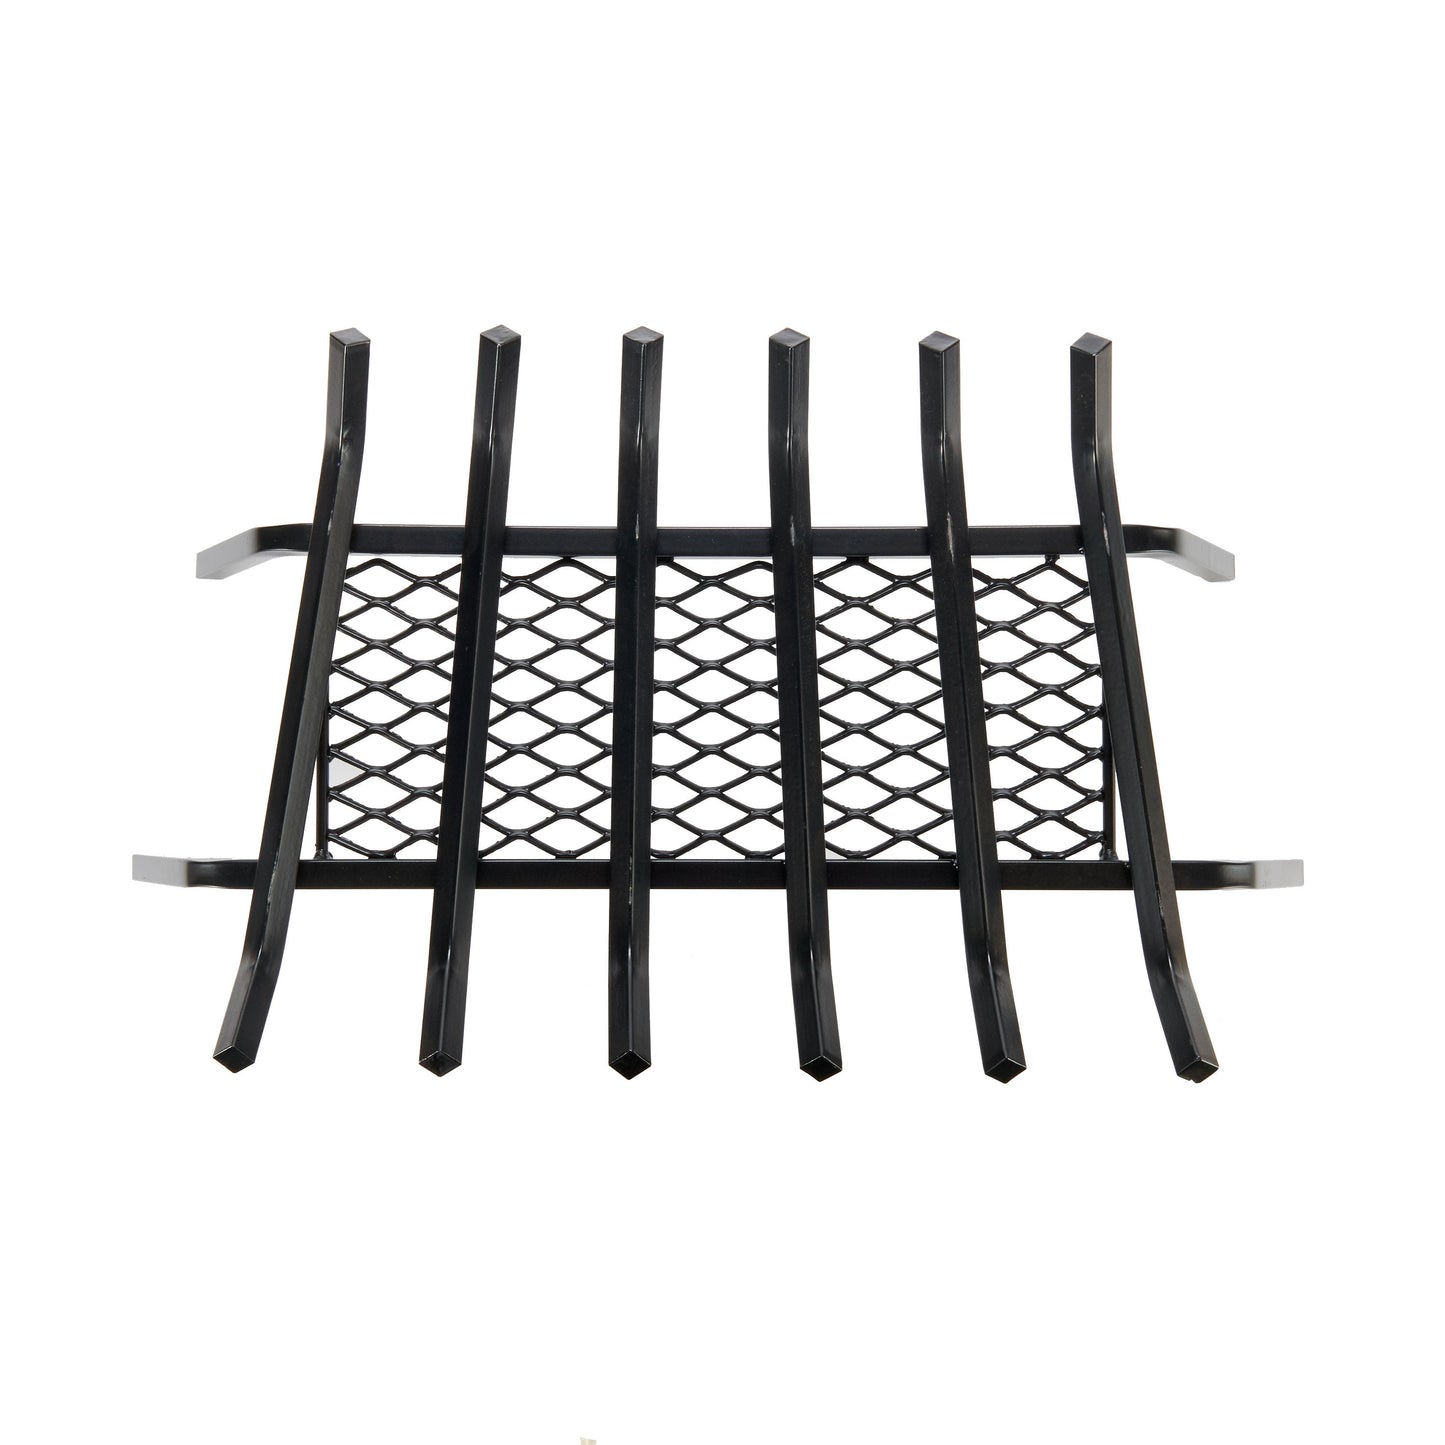 HY-C Liberty Foundry G200 Series 27" Steel Bar Grates With Mesh